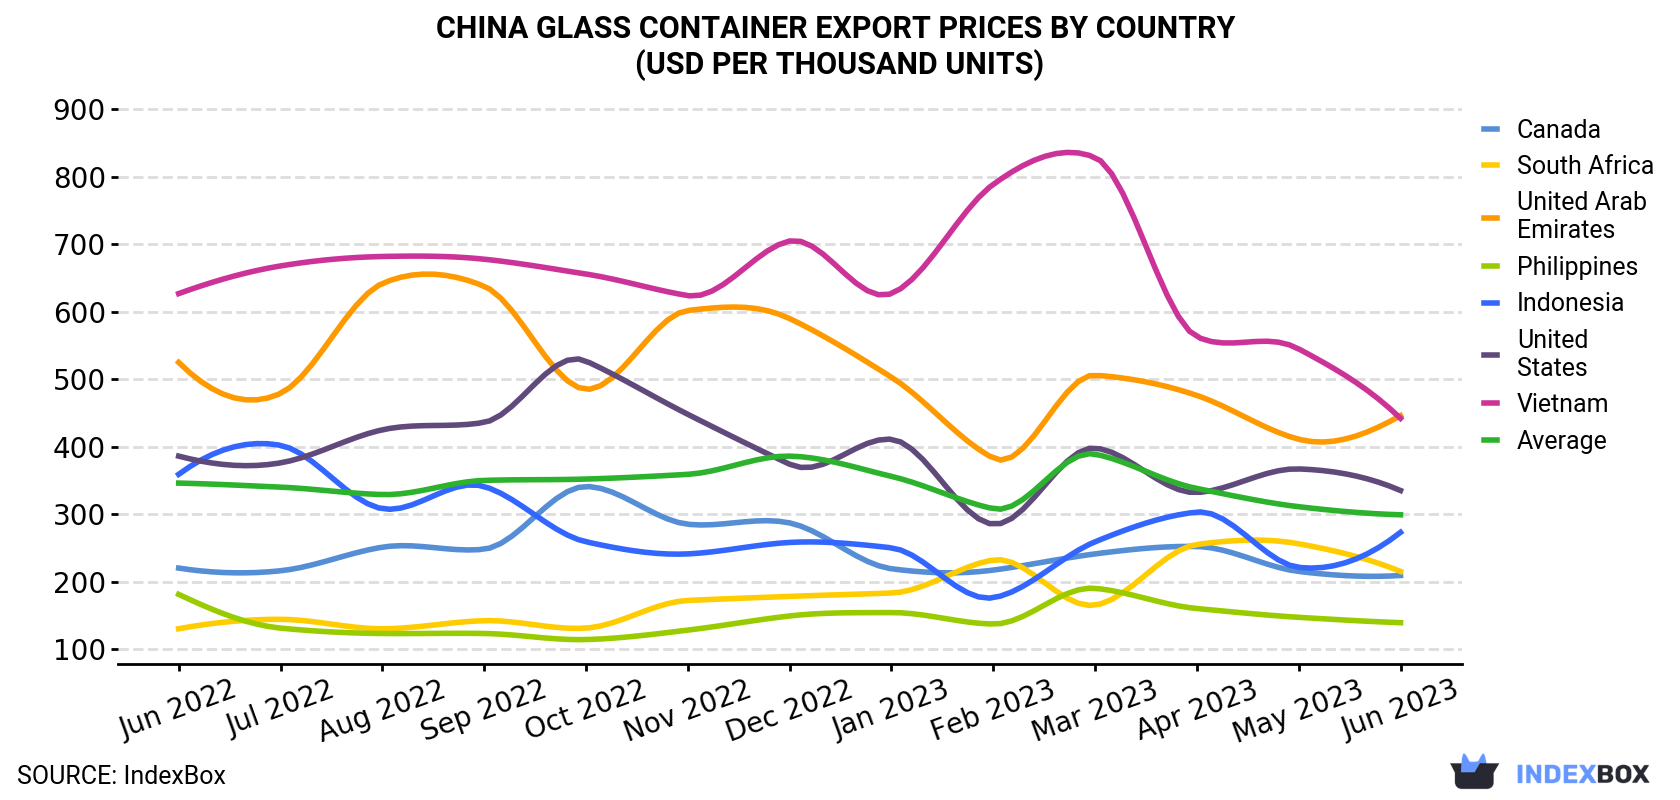 China Glass Container Export Prices By Country (USD Per Thousand Units)